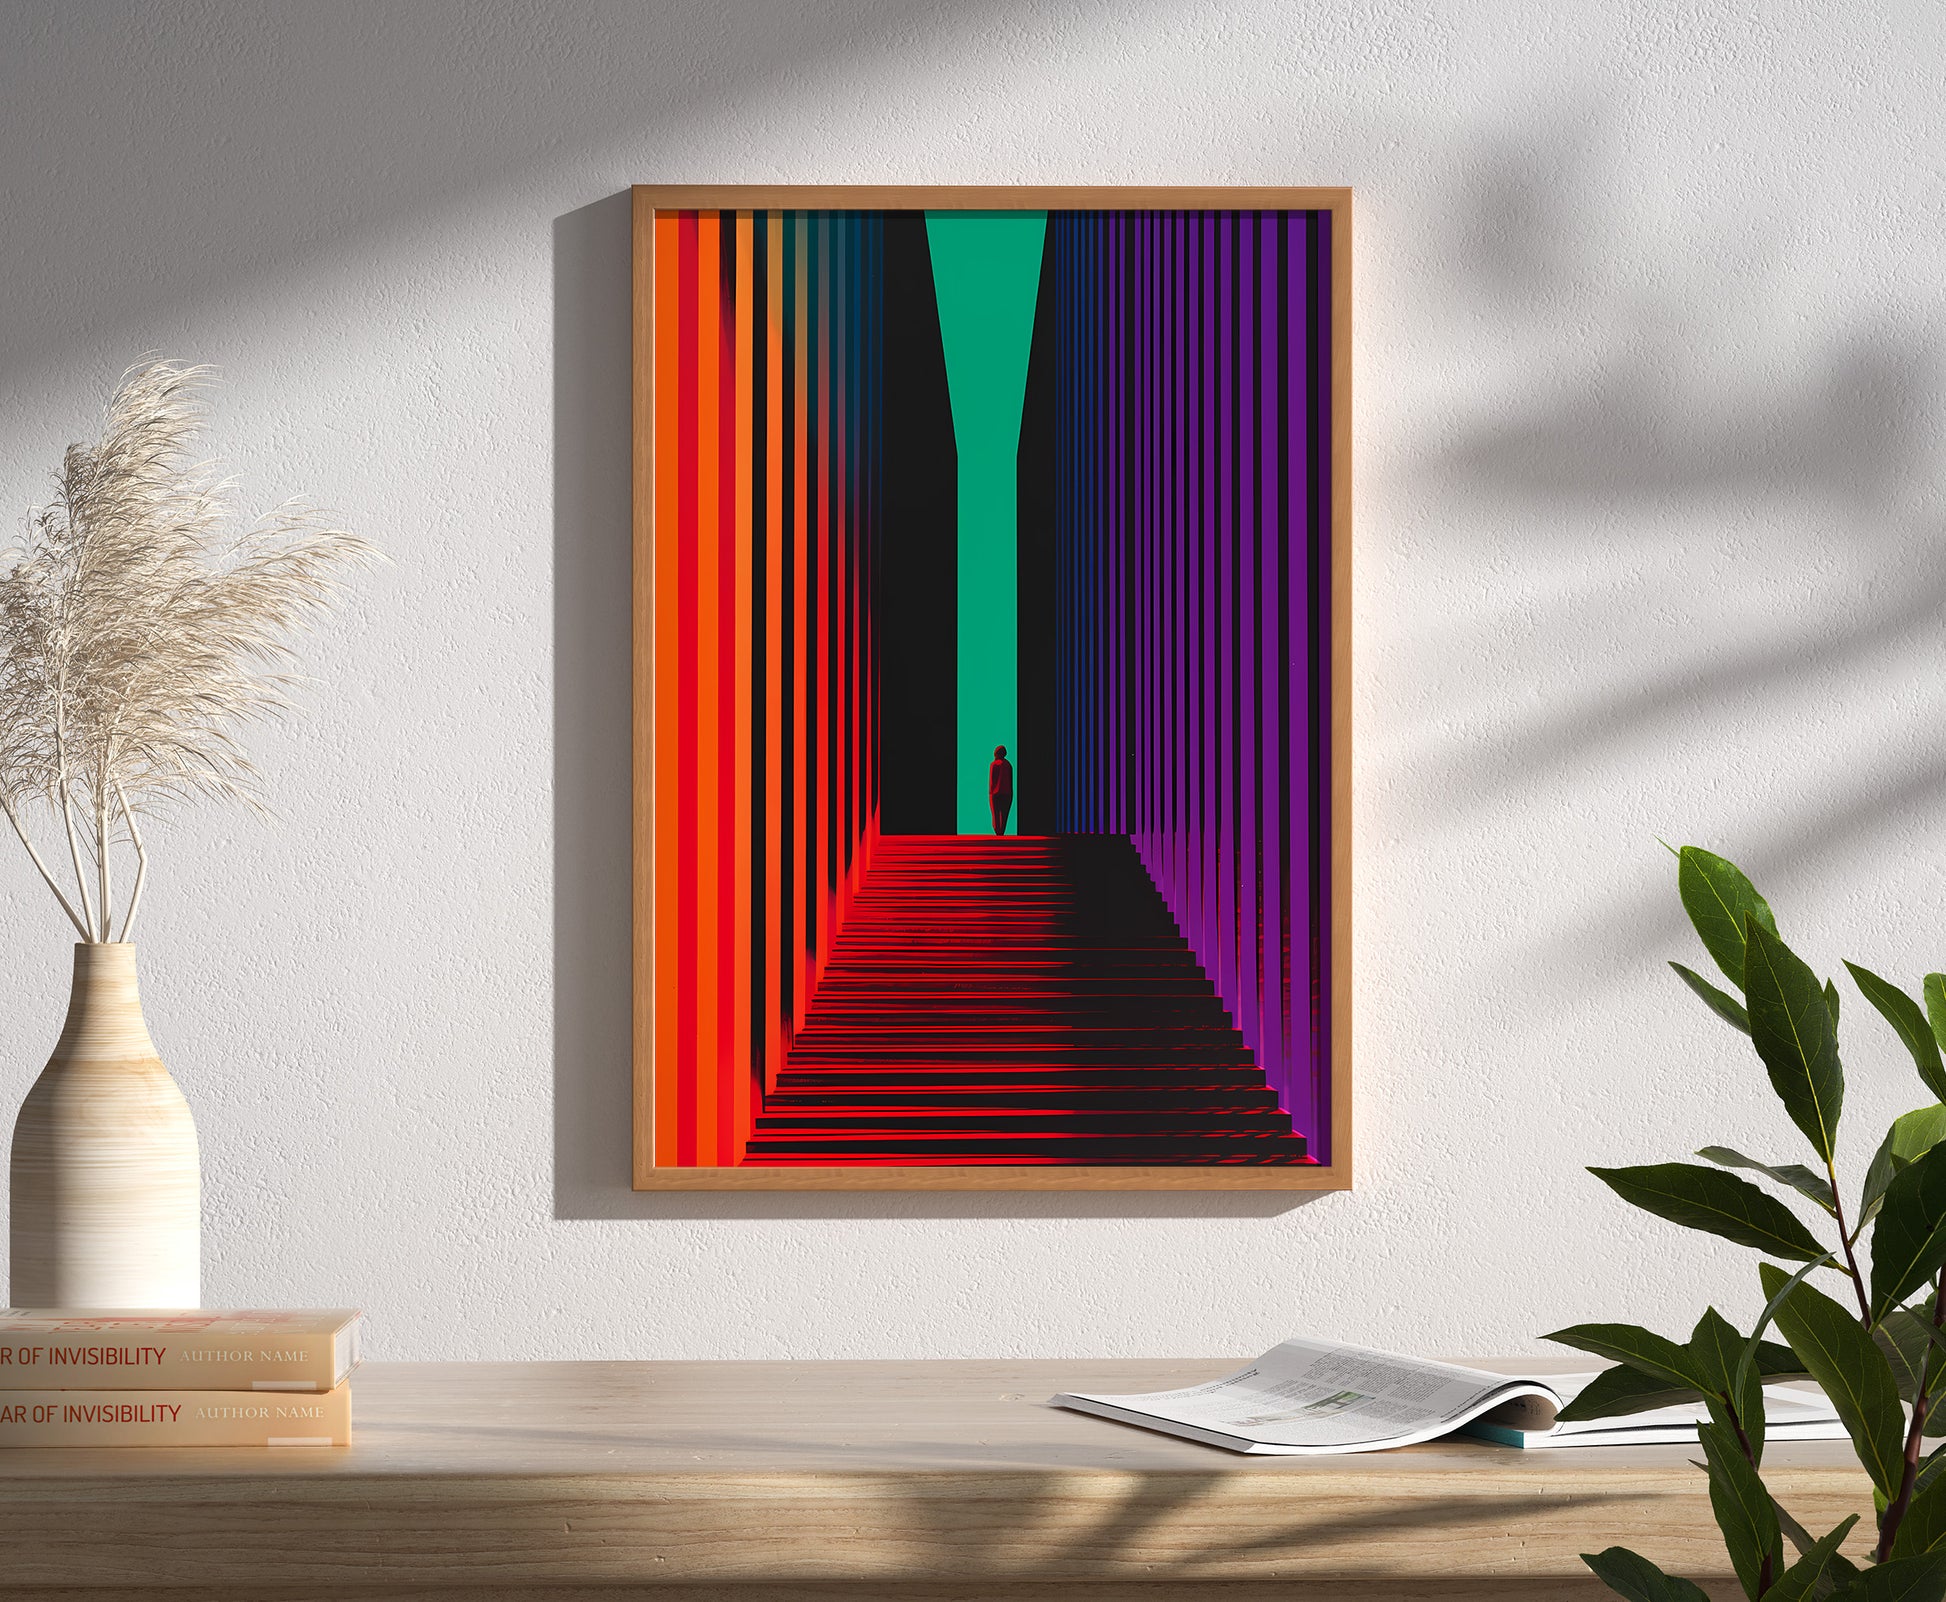 Modern art canvas on a wall depicting colorful stripes and a solitary figure.